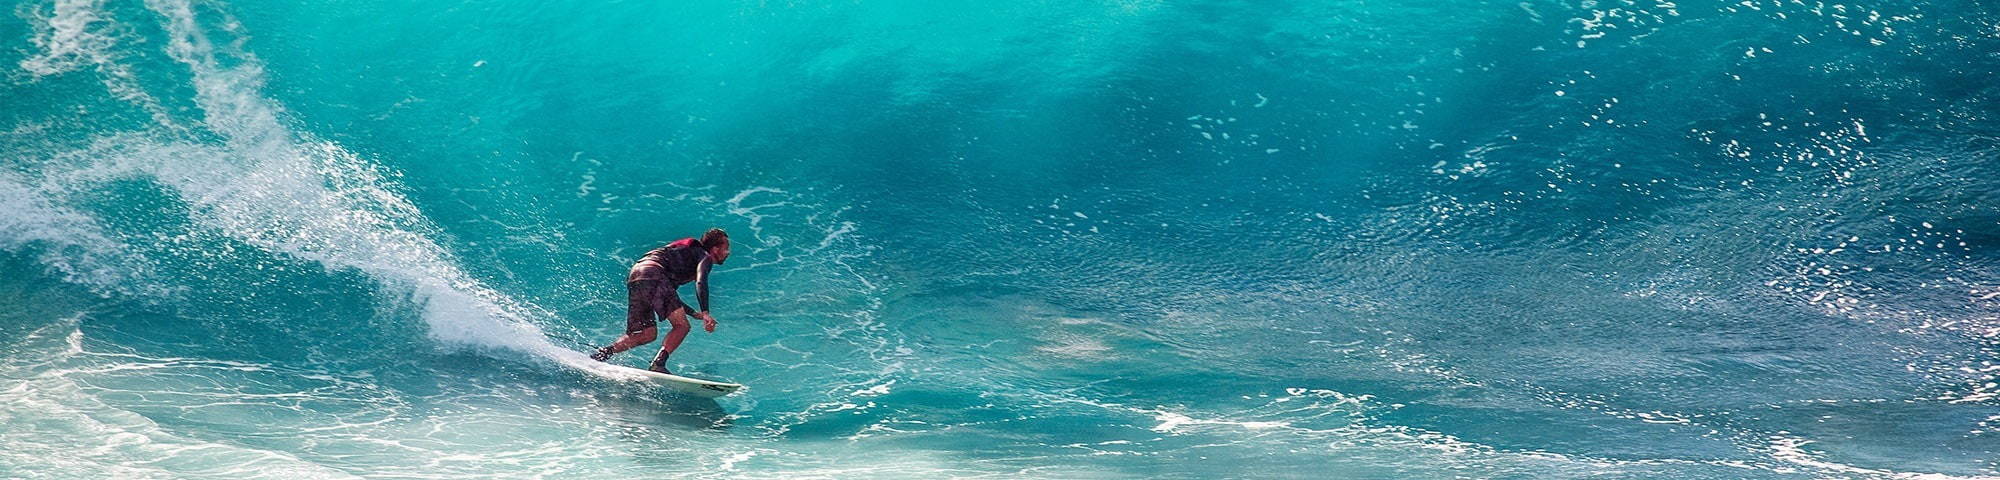 Male surfing waves in clear blue sea